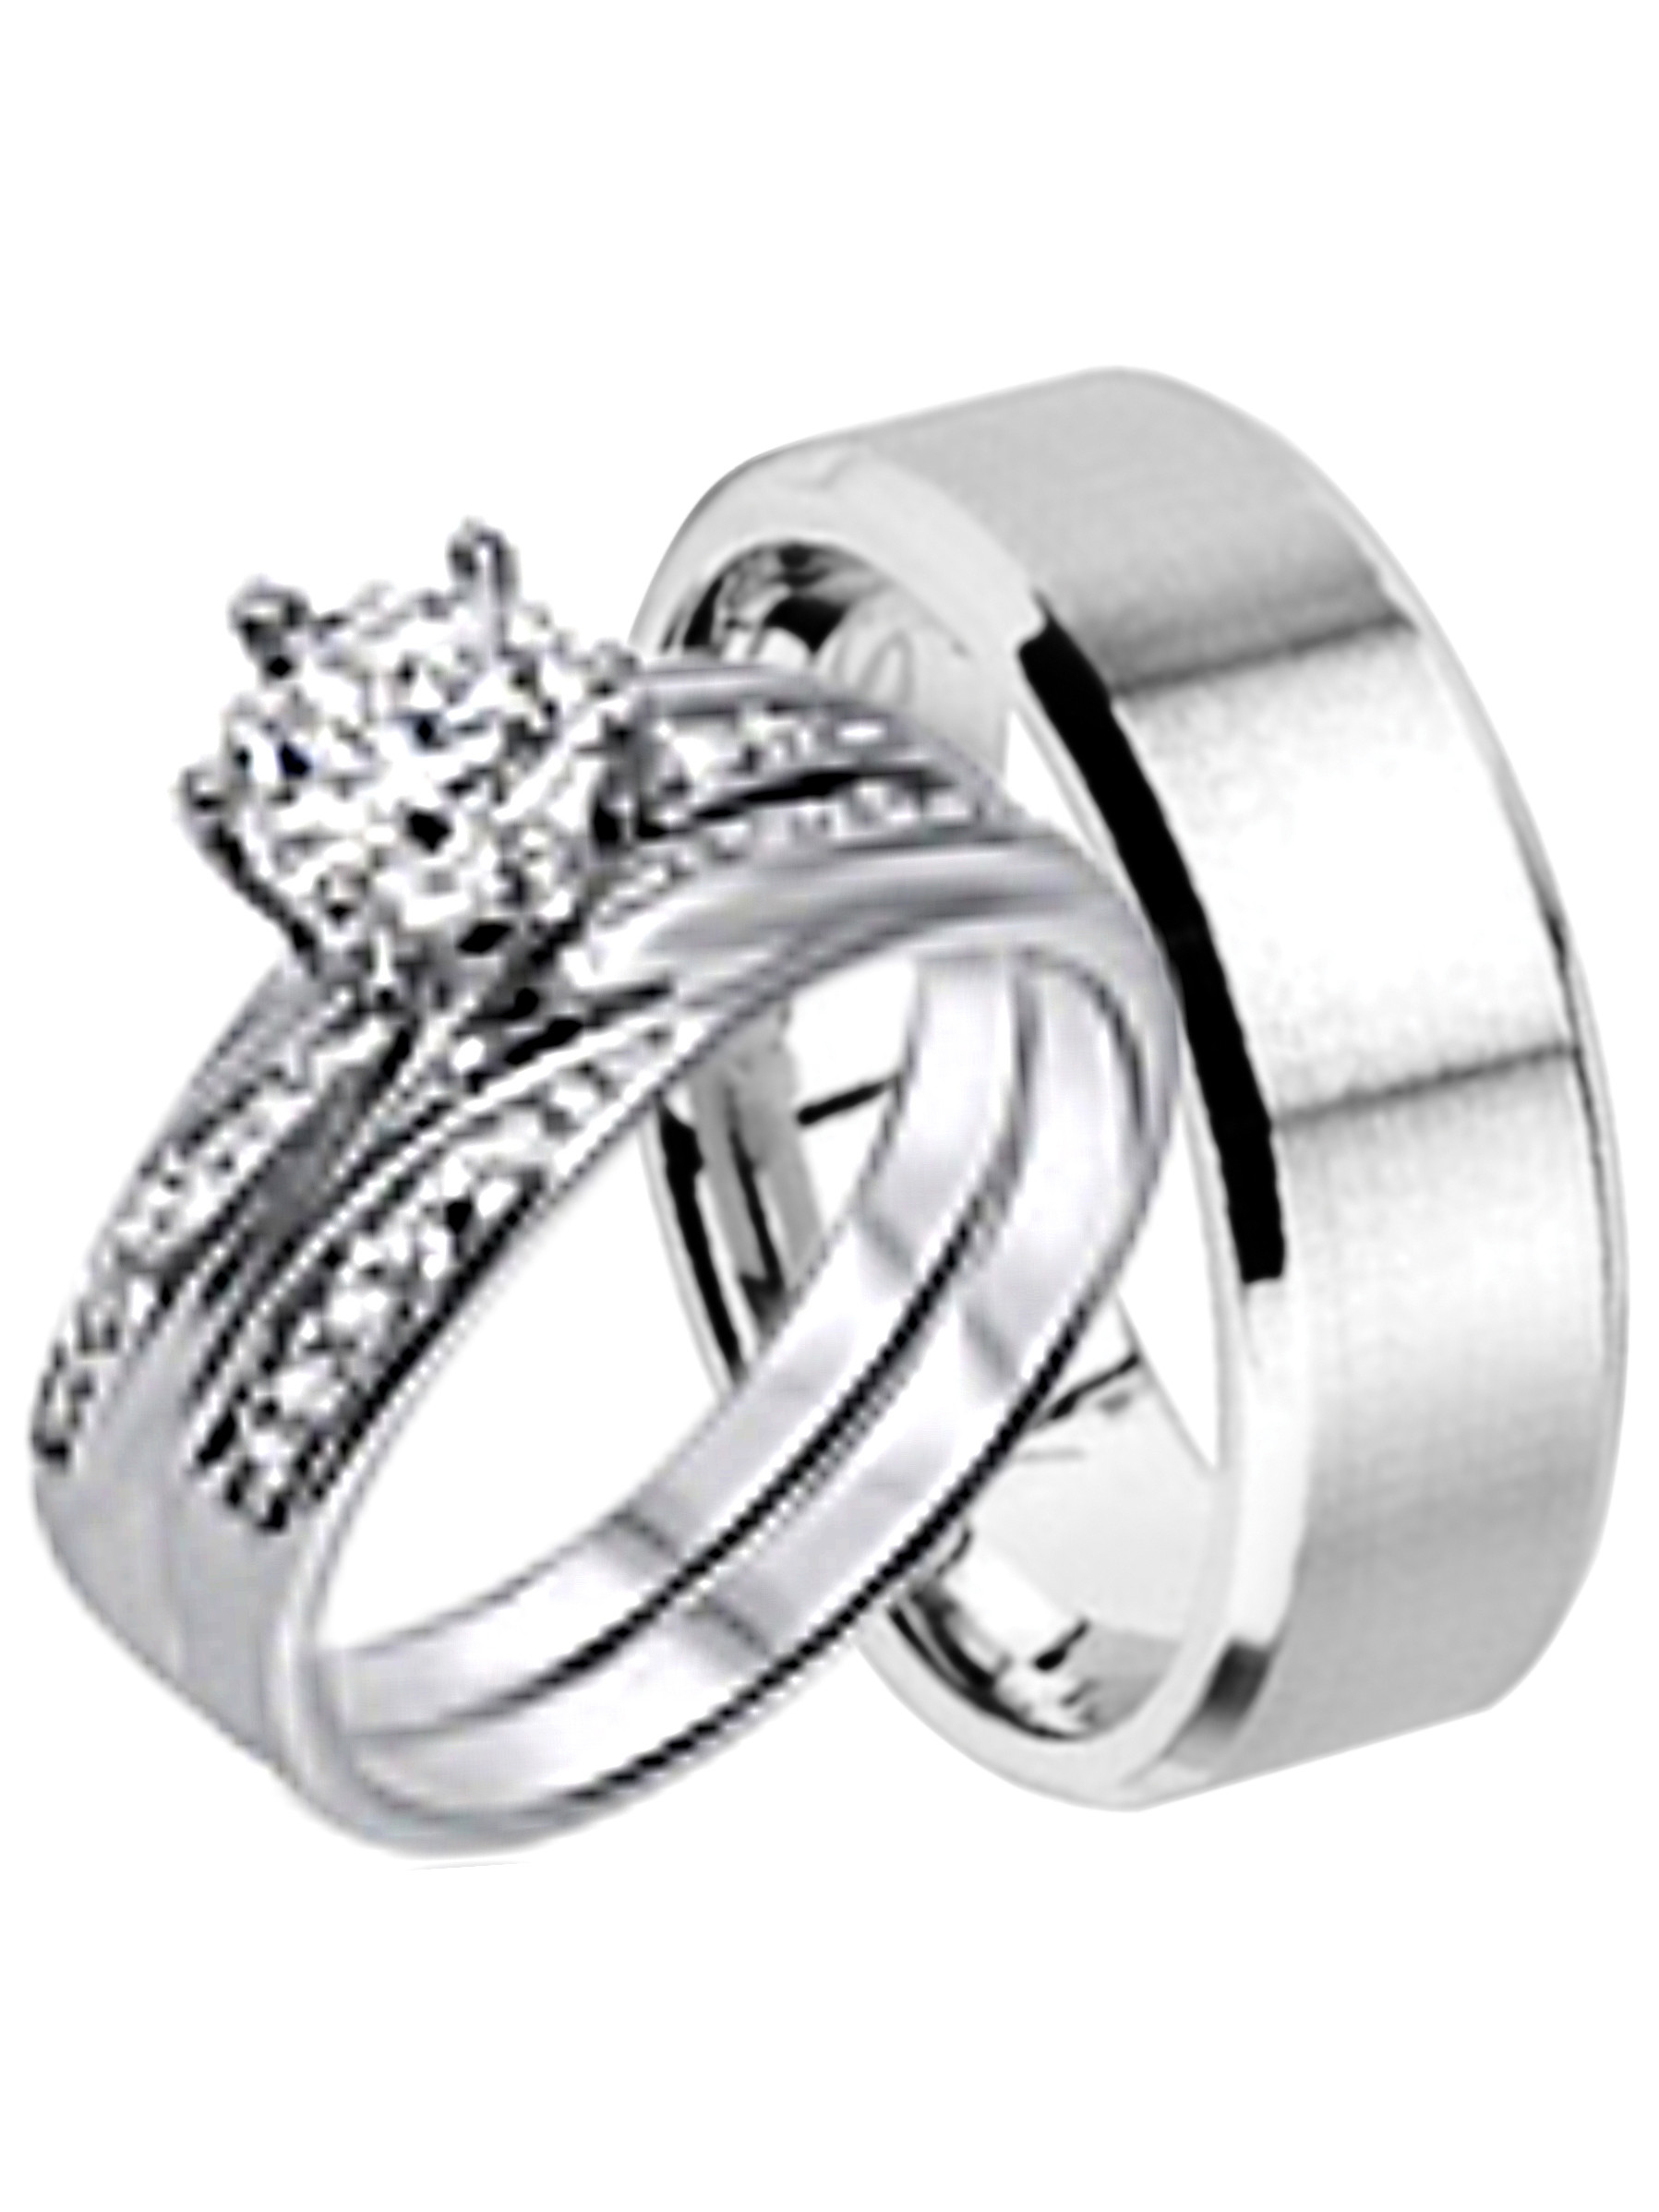 Walmart His And Hers Wedding Rings
 His and Hers Wedding Ring Set Matching Wedding Bands for